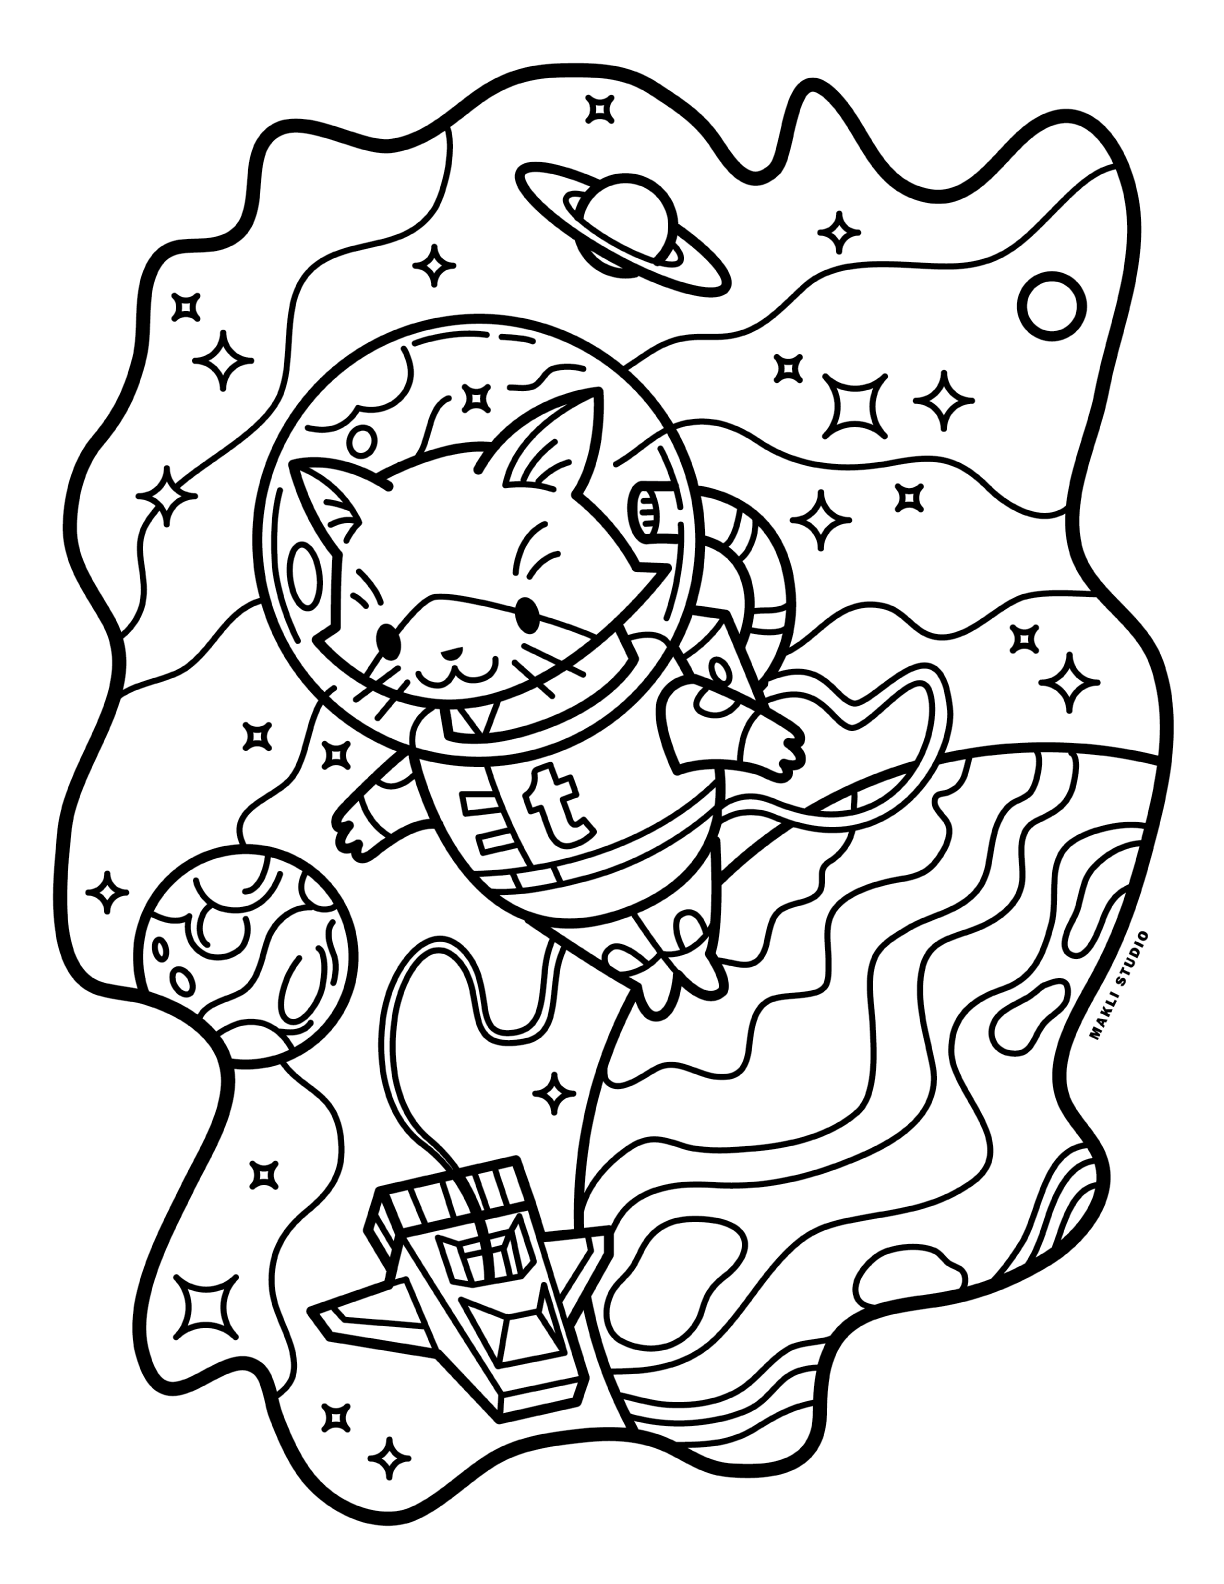 MAKLI STUDIO — Recently made a set of coloring pages for a...